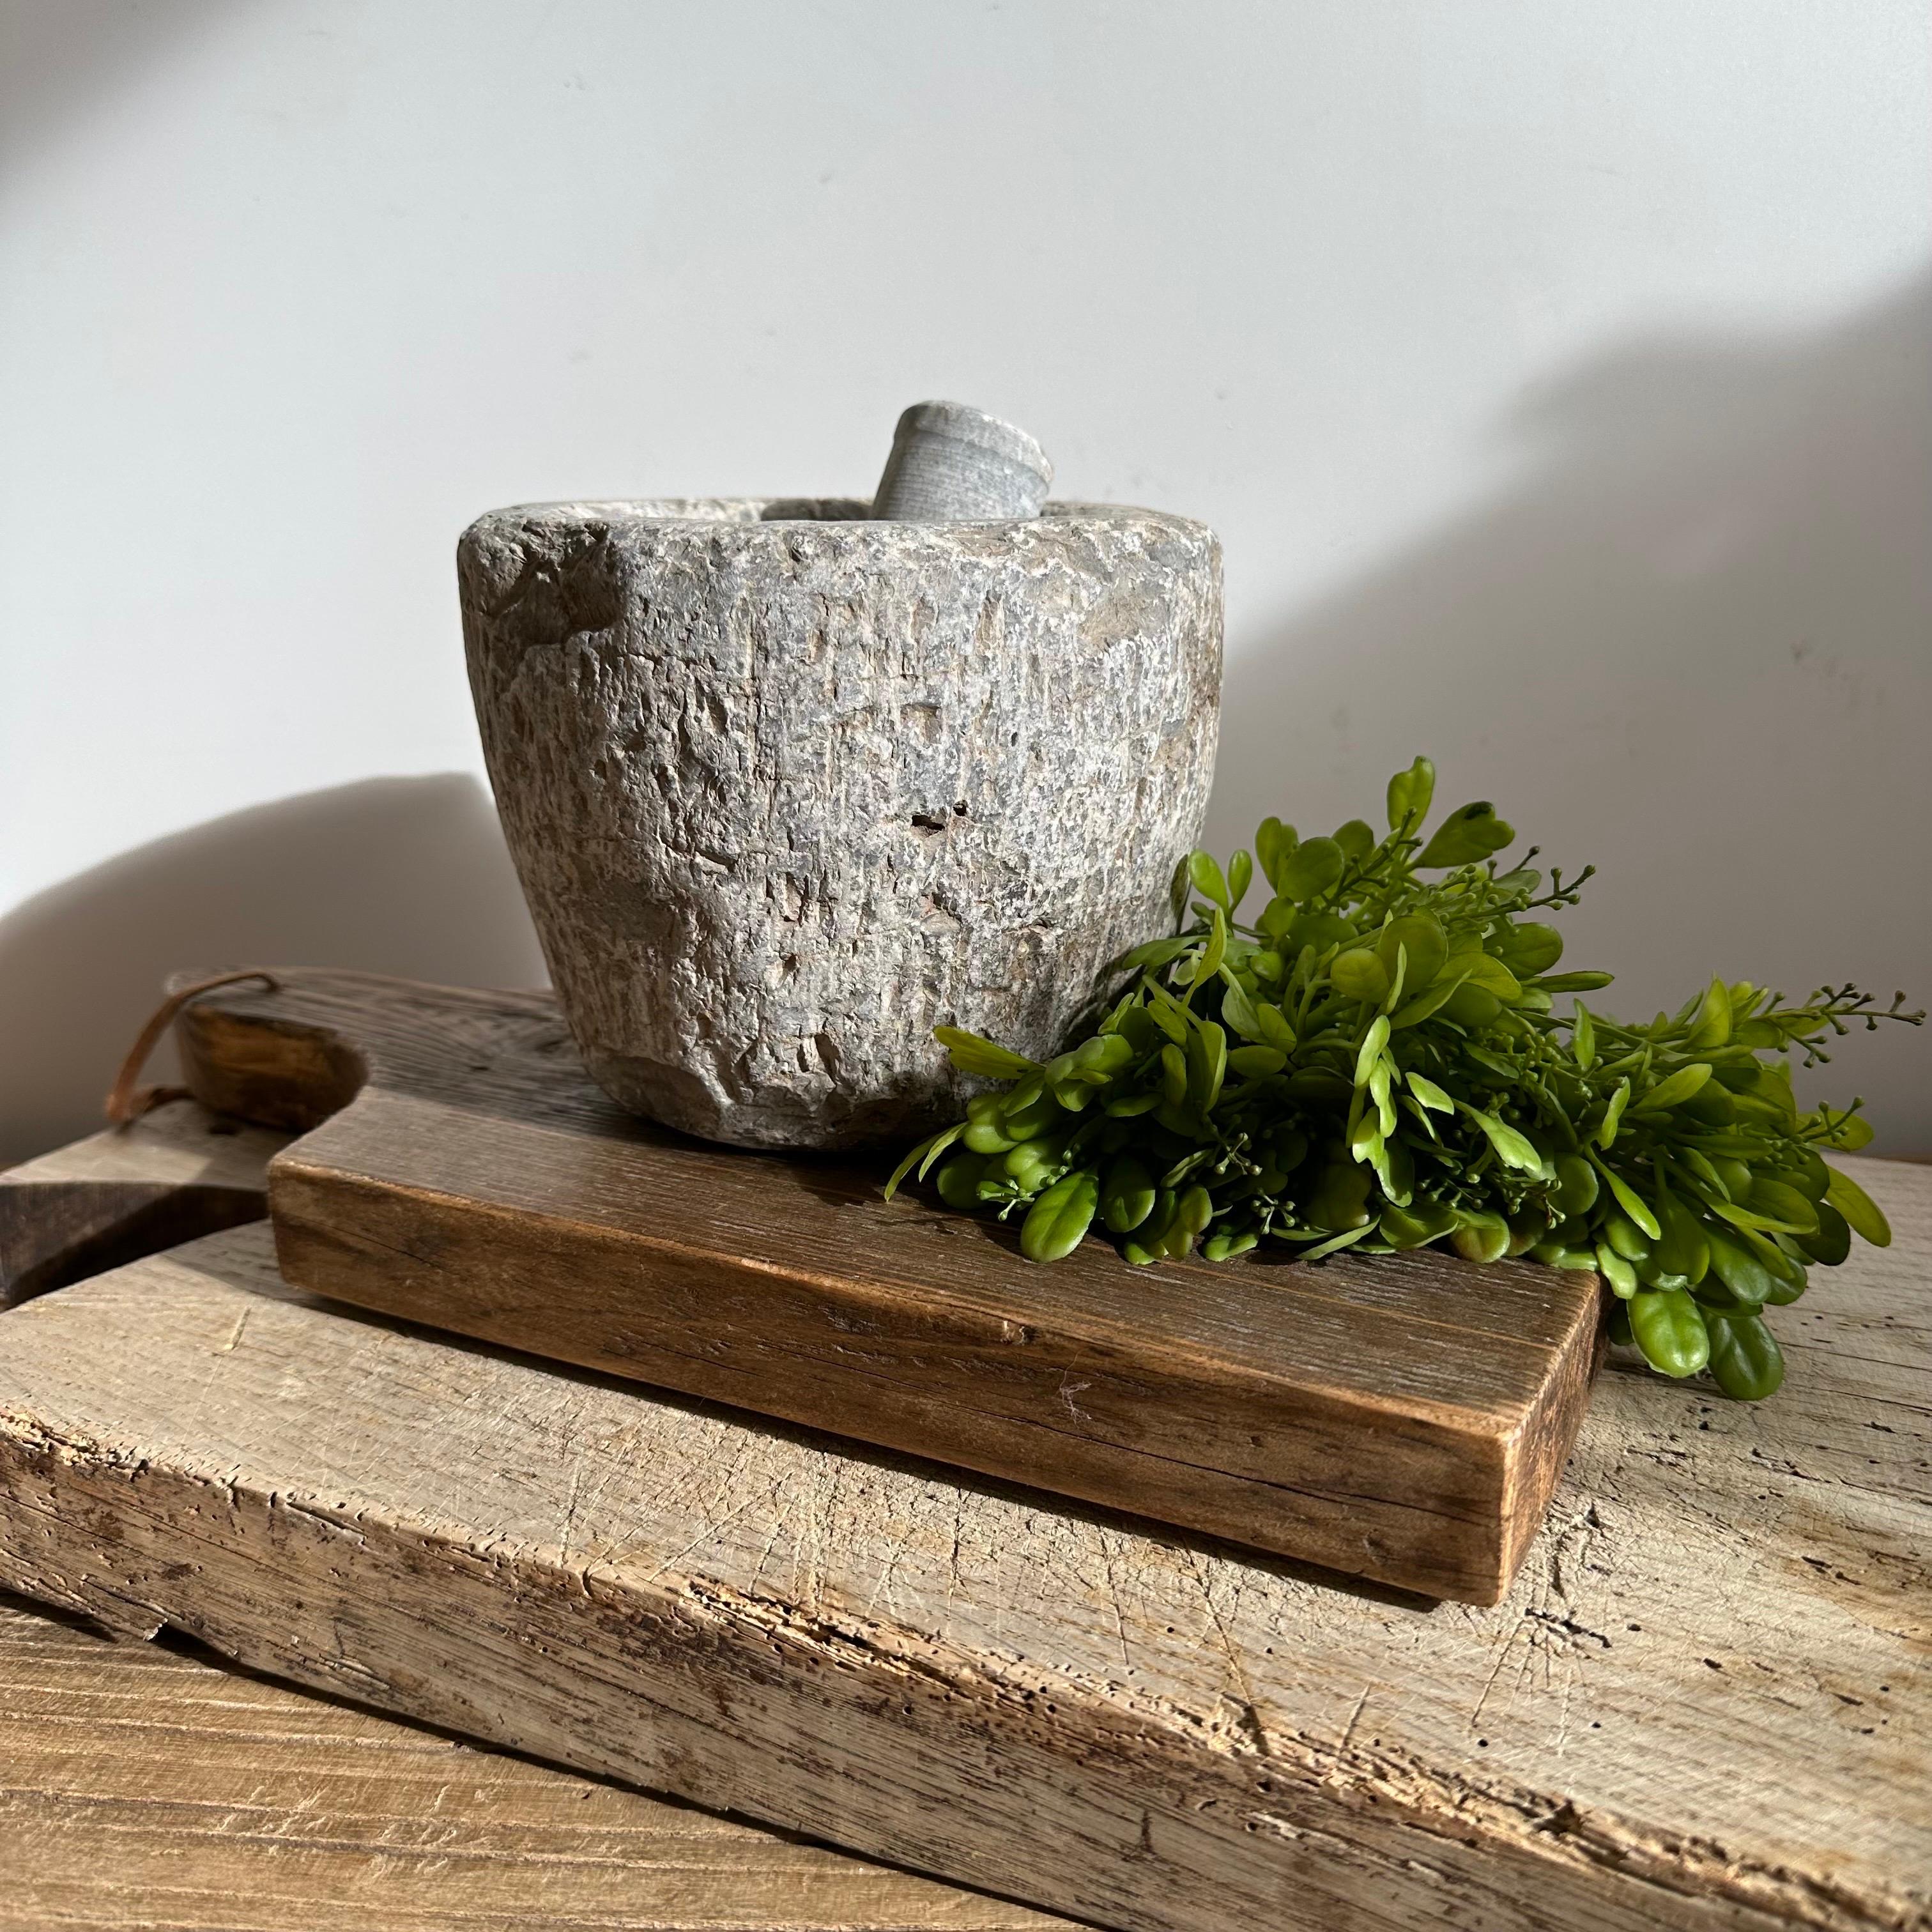 Antique stone mortar bowl and pestle set, great decorative item, or can be used. Accessories not included 
Size: 6.5”d x 5” h.